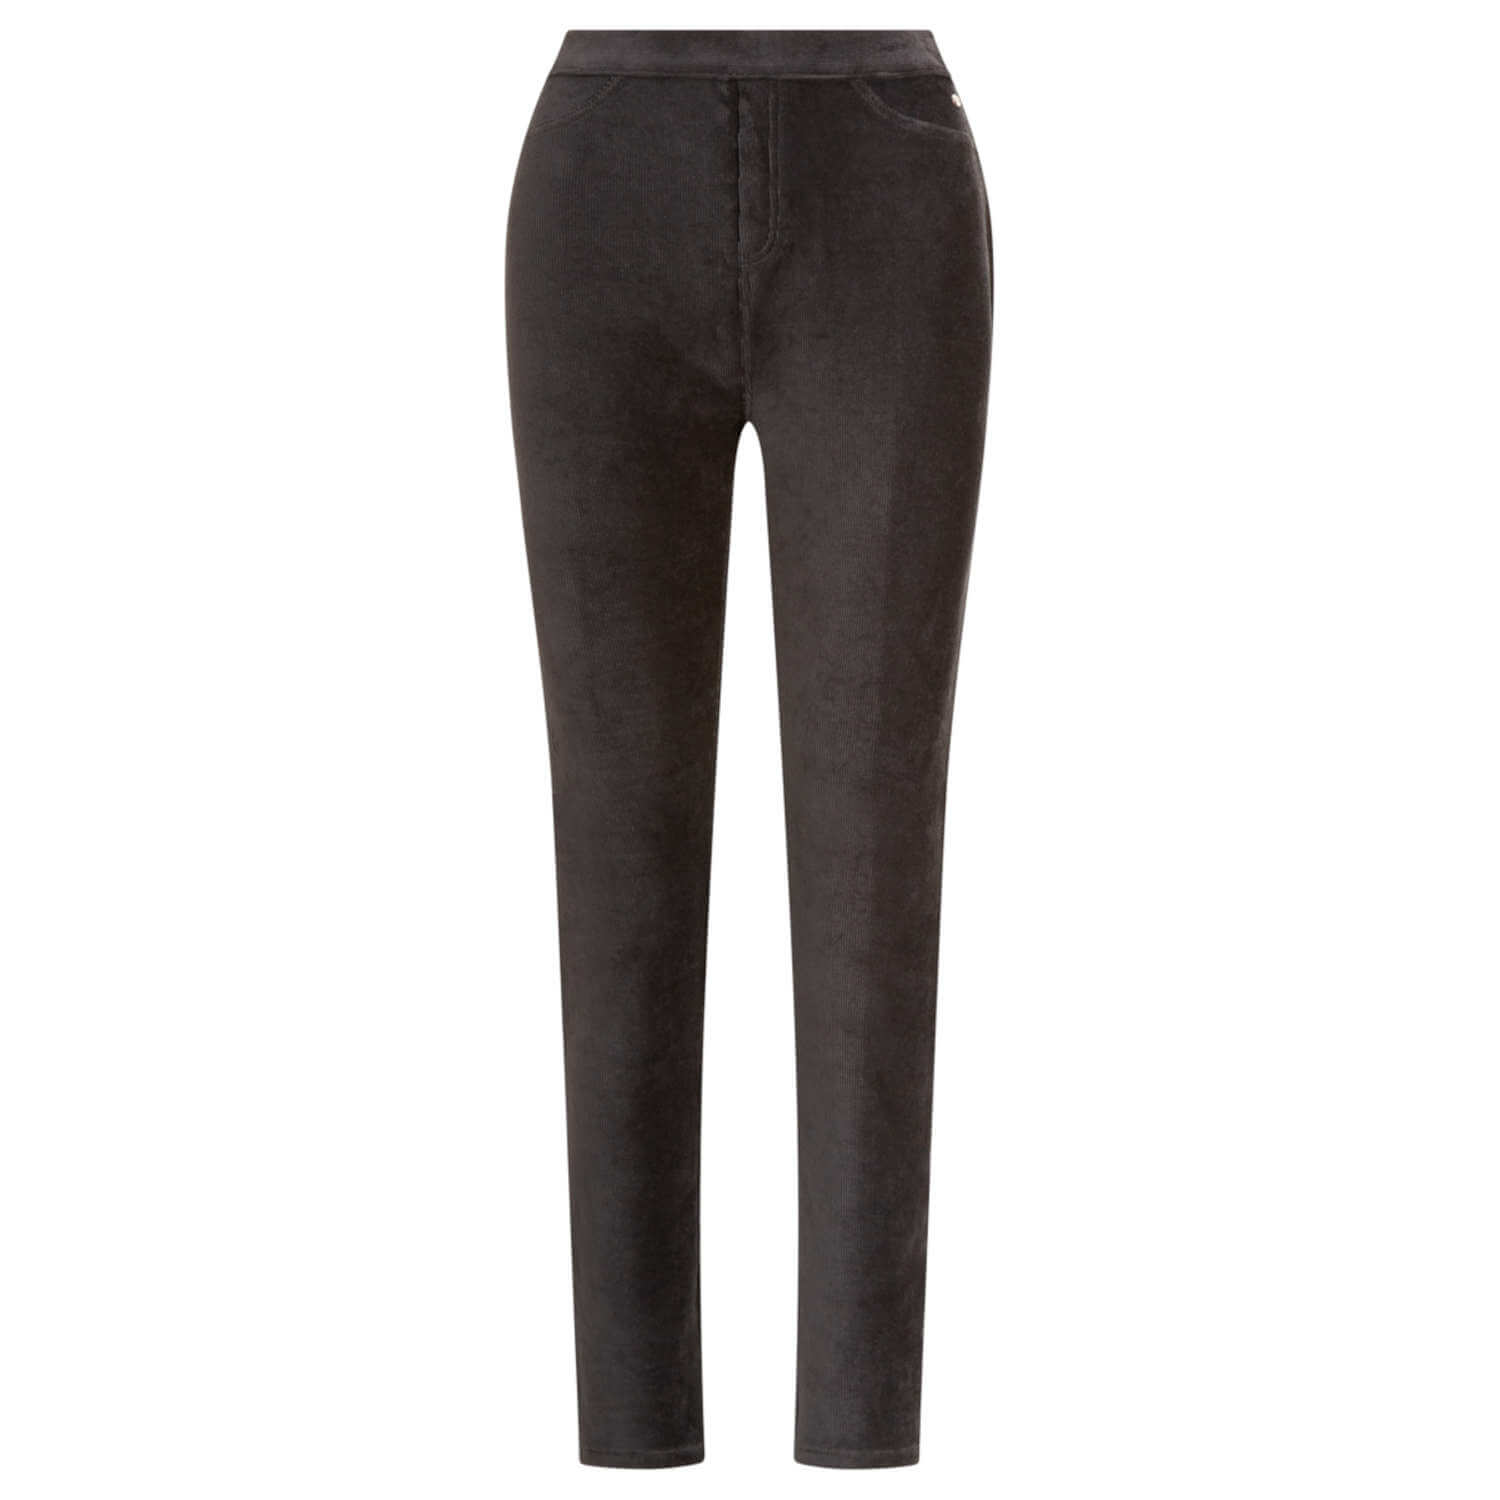 Tigiwear Ribbed Velour Trousers - Charcoal 5 Shaws Department Stores